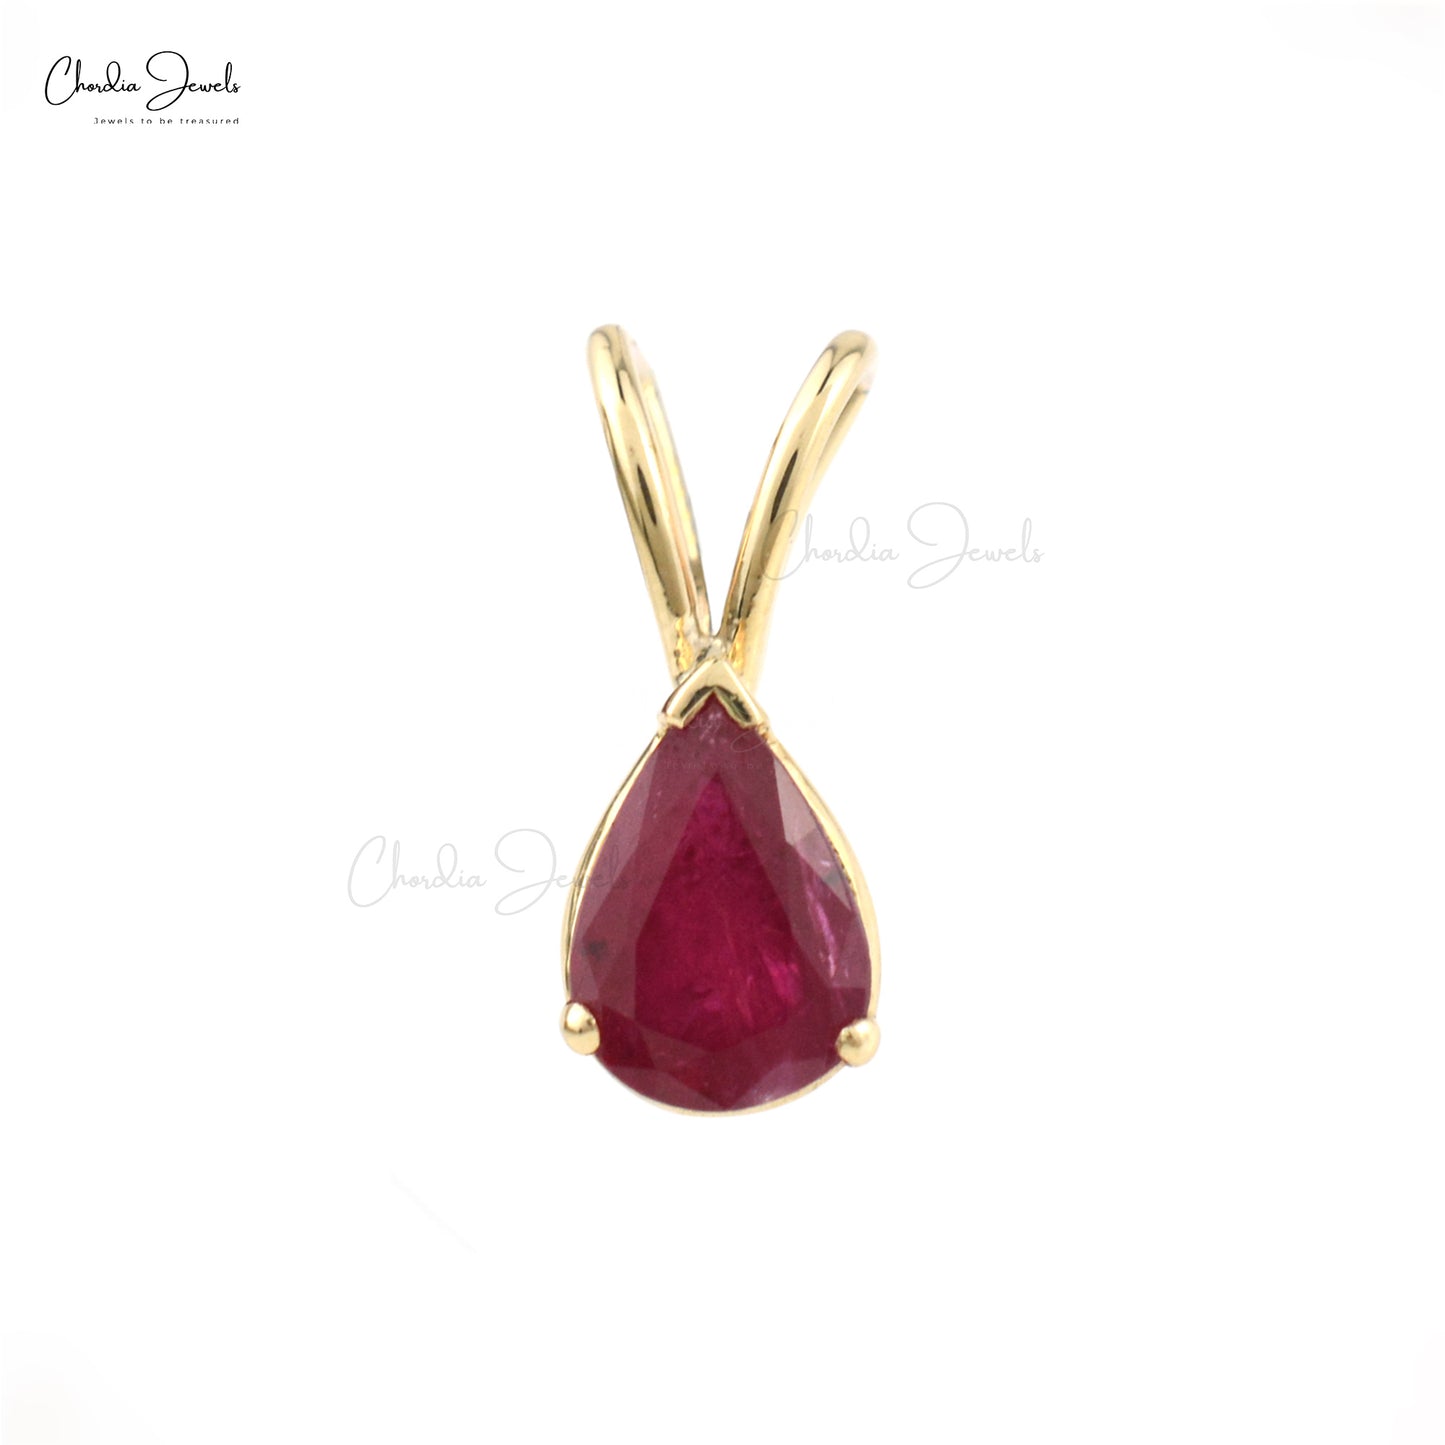 Gemstone Necklace - Meesh | Ana Luisa | Online Jewelry Store At Prices  You'll Love